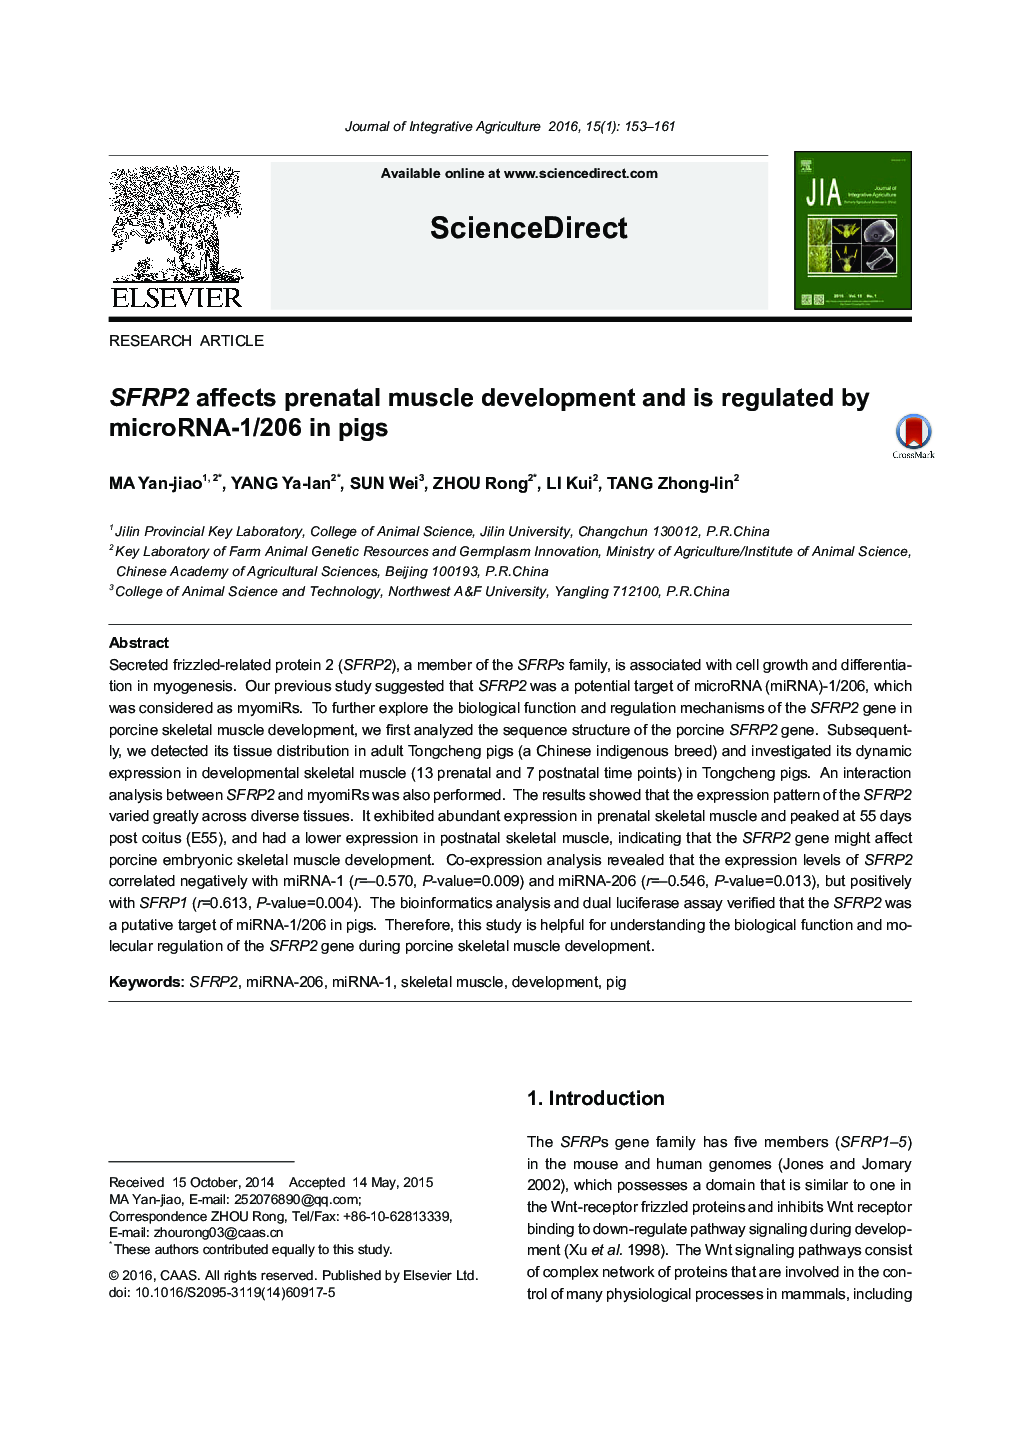 SFRP2 affects prenatal muscle development and is regulated by microRNA-1/206 in pigs